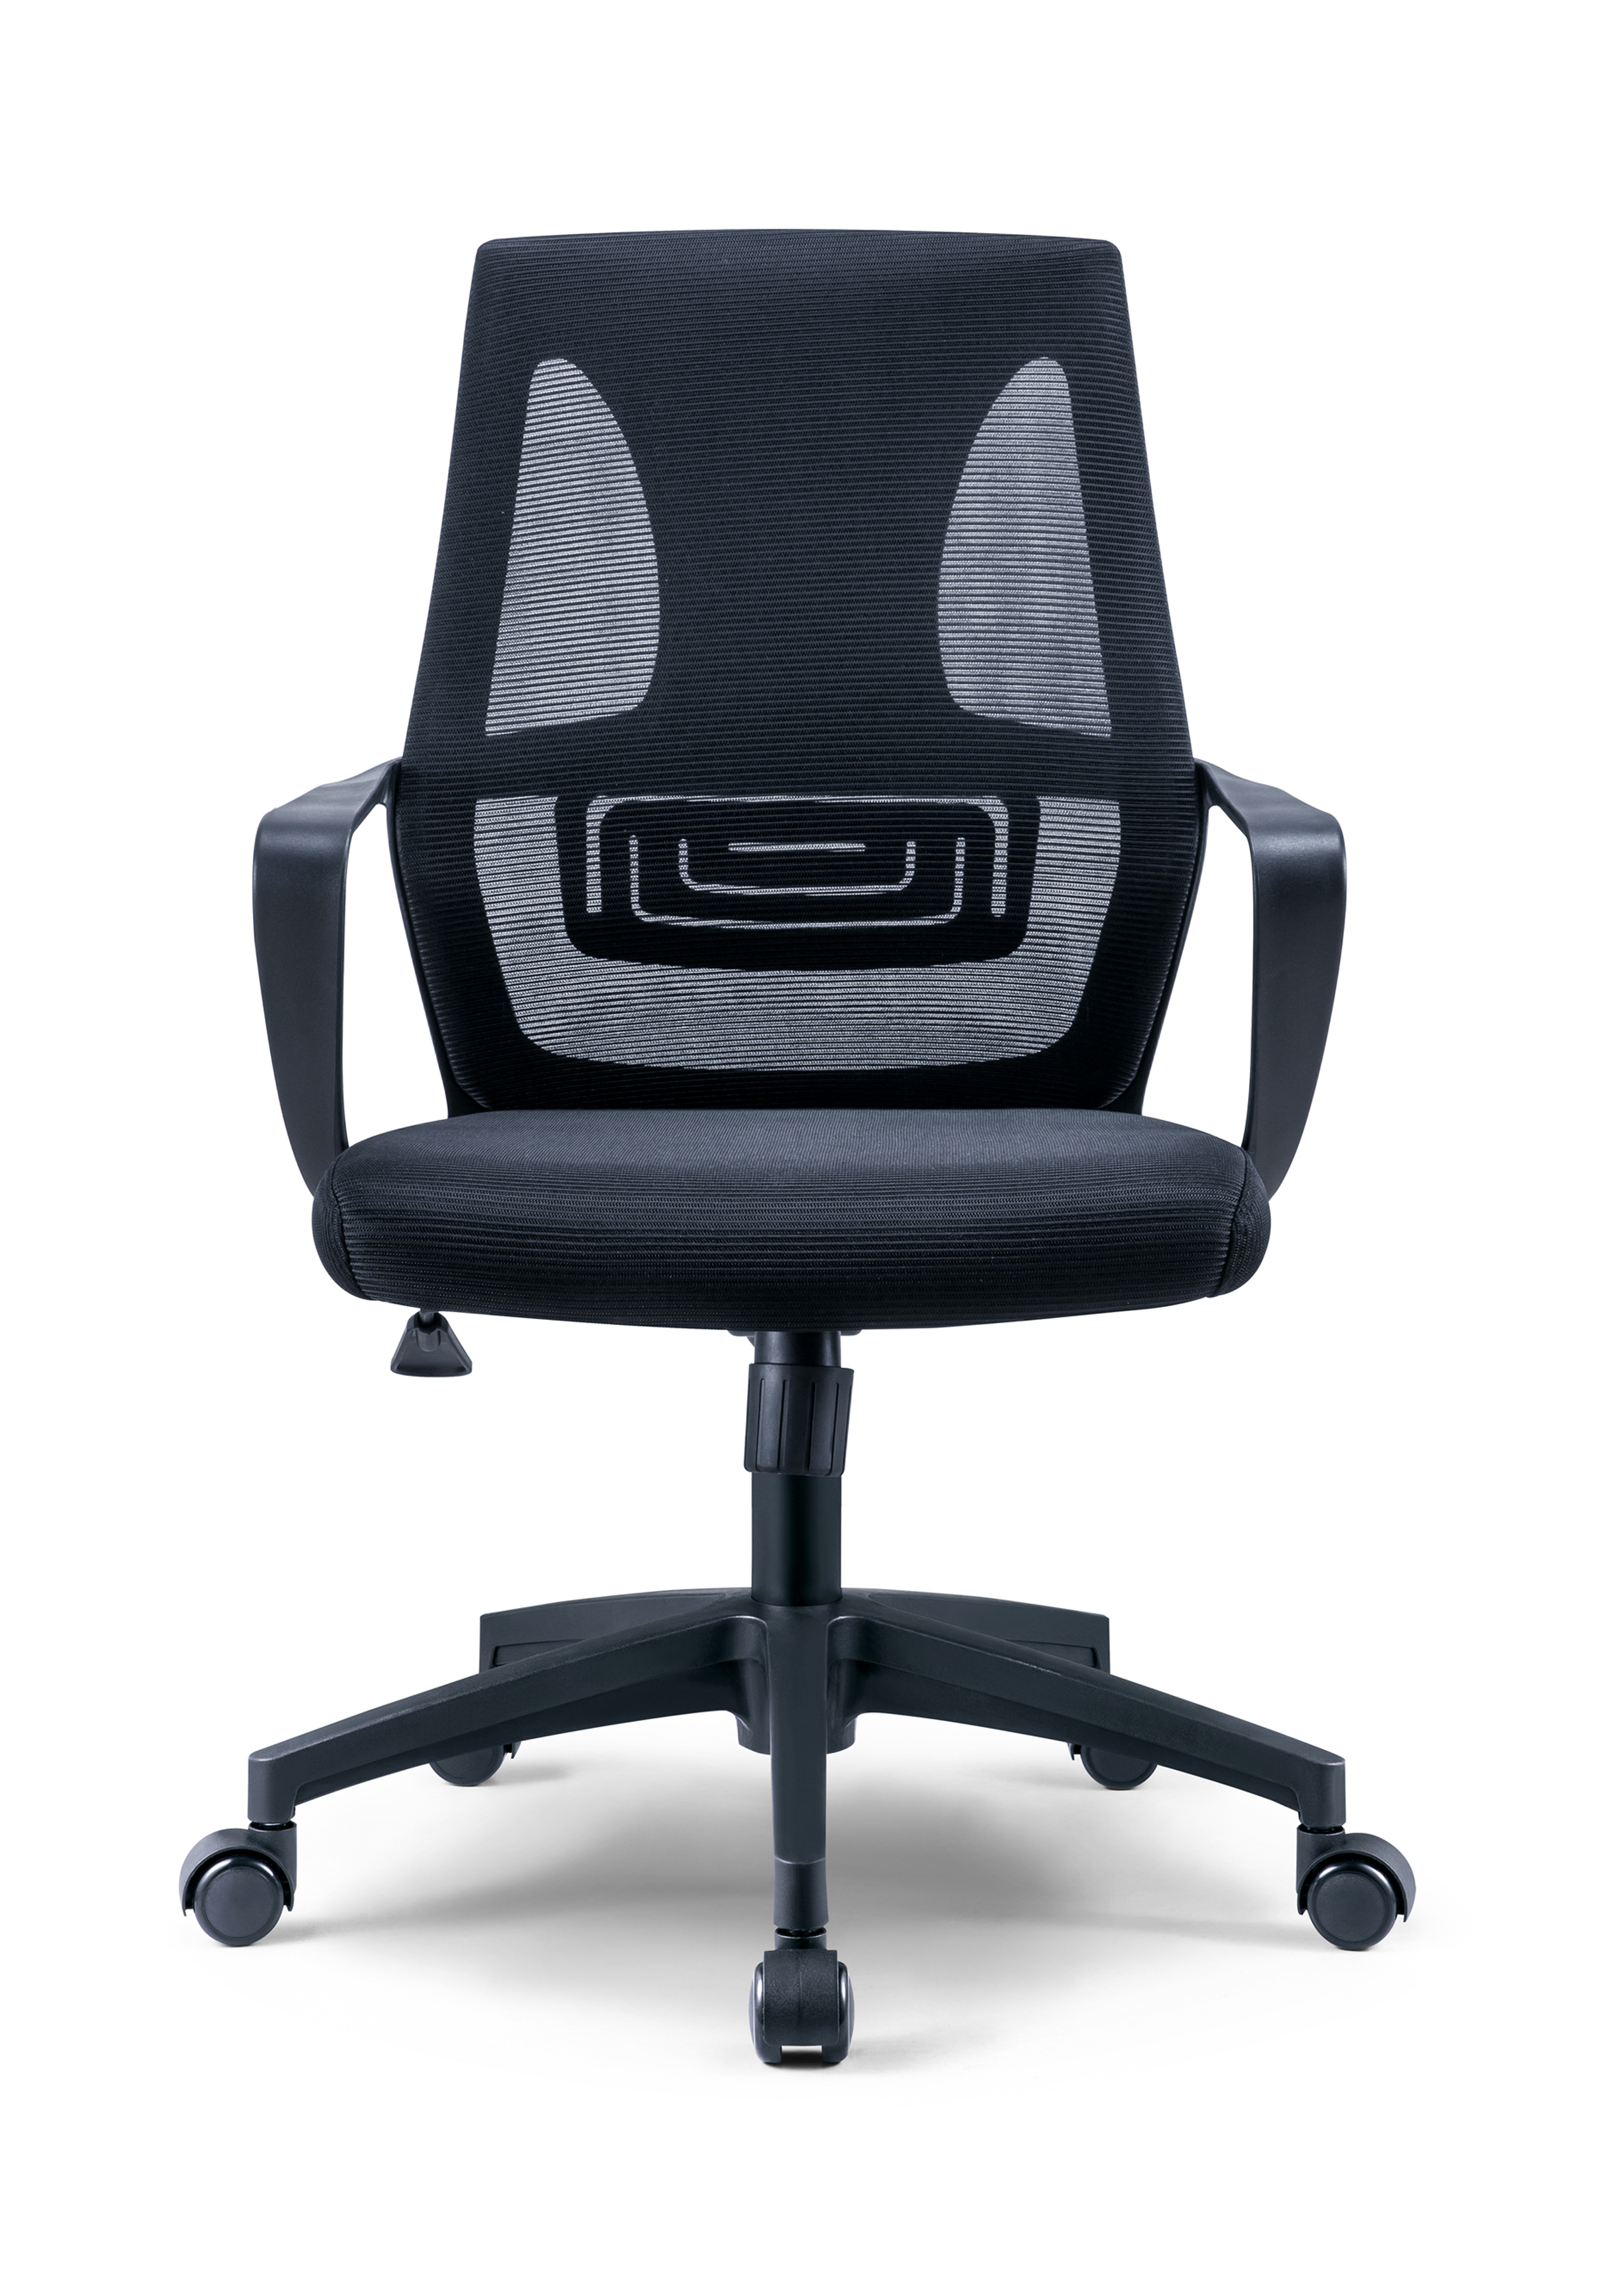 Newcity 544B Factory Direct Mesh Chair Swivel Middle Back Executive Mesh Office Chair for Meeting Room Mesh Chair Computer Mesh Chair Supplier Foshan China